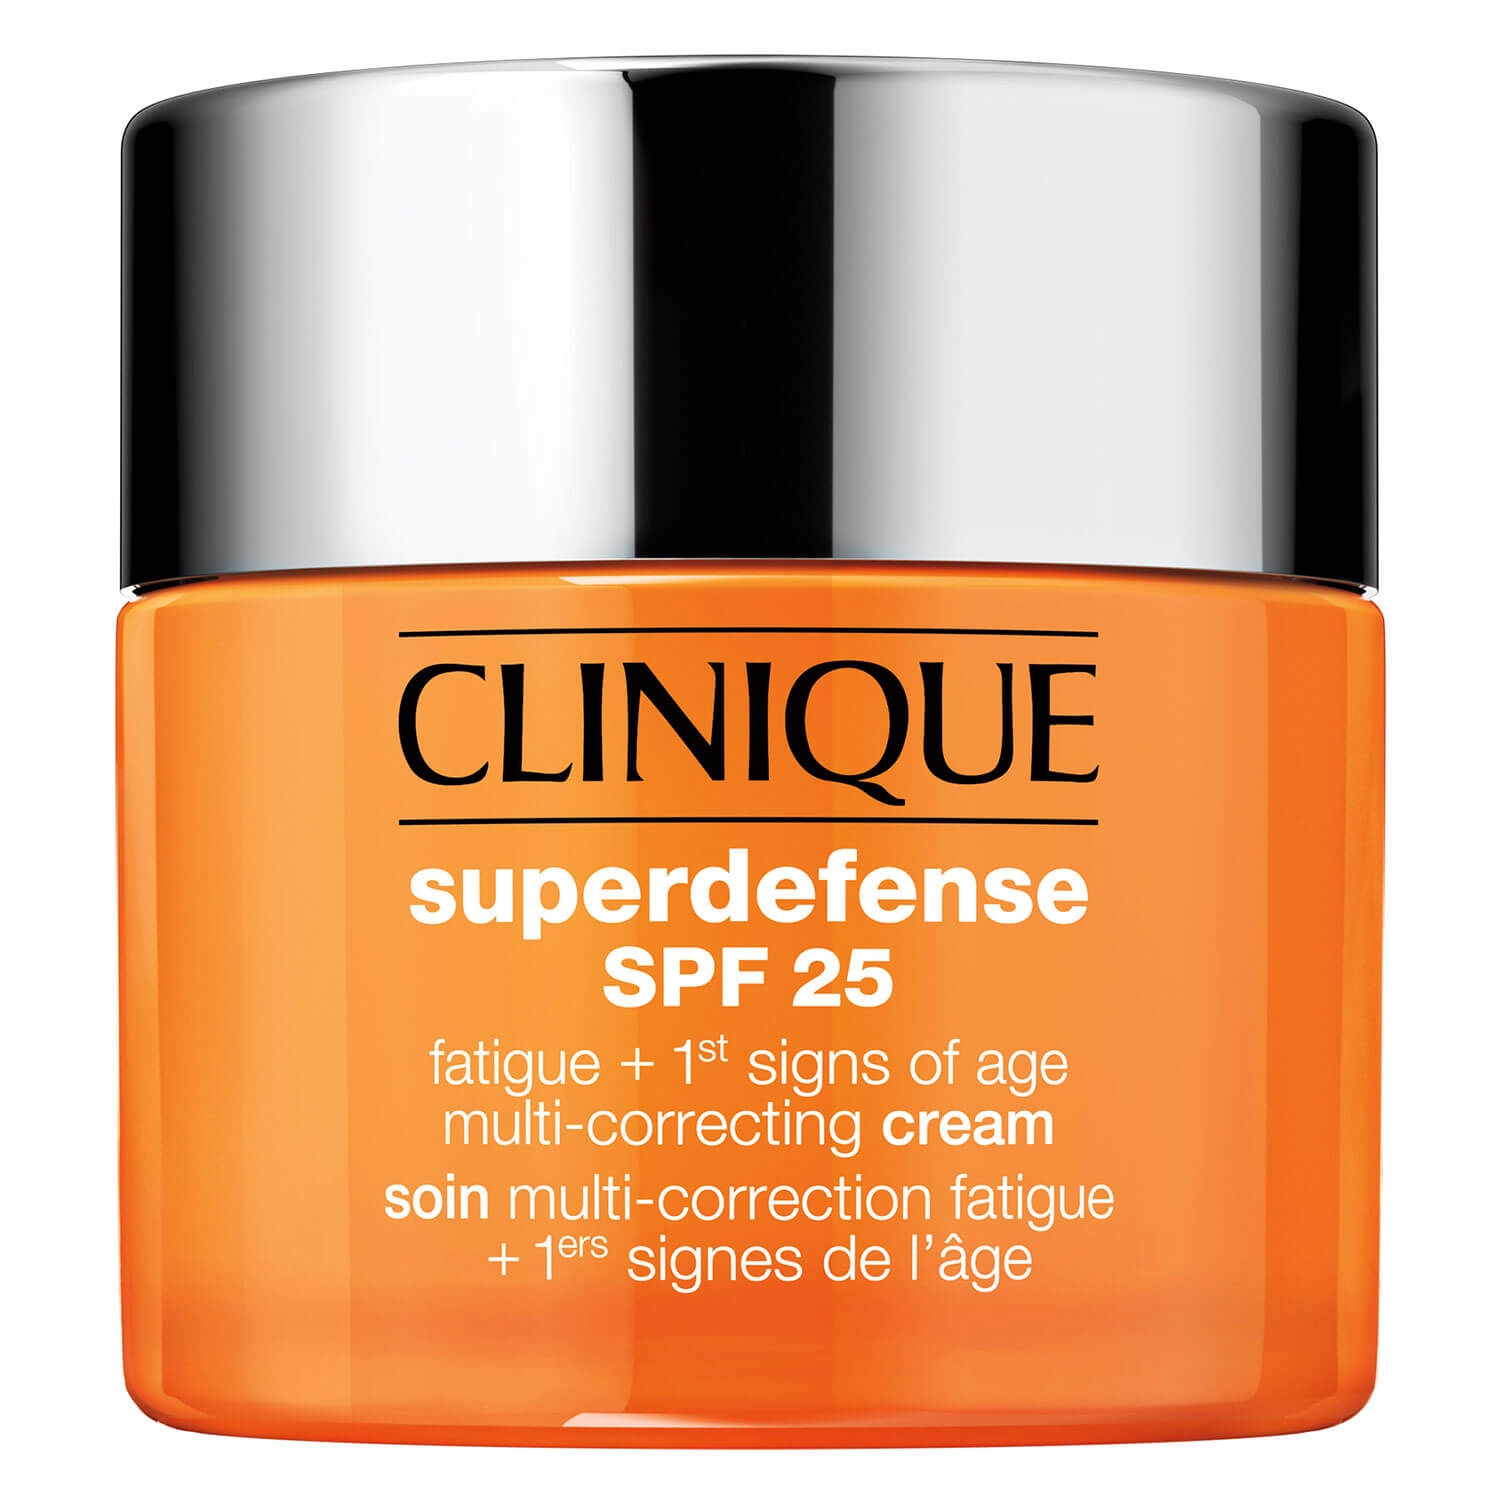 Product image from Superdefense - SPF 25 Fatigue + 1st Signs of Age Multi-Correcting Cream 1/2